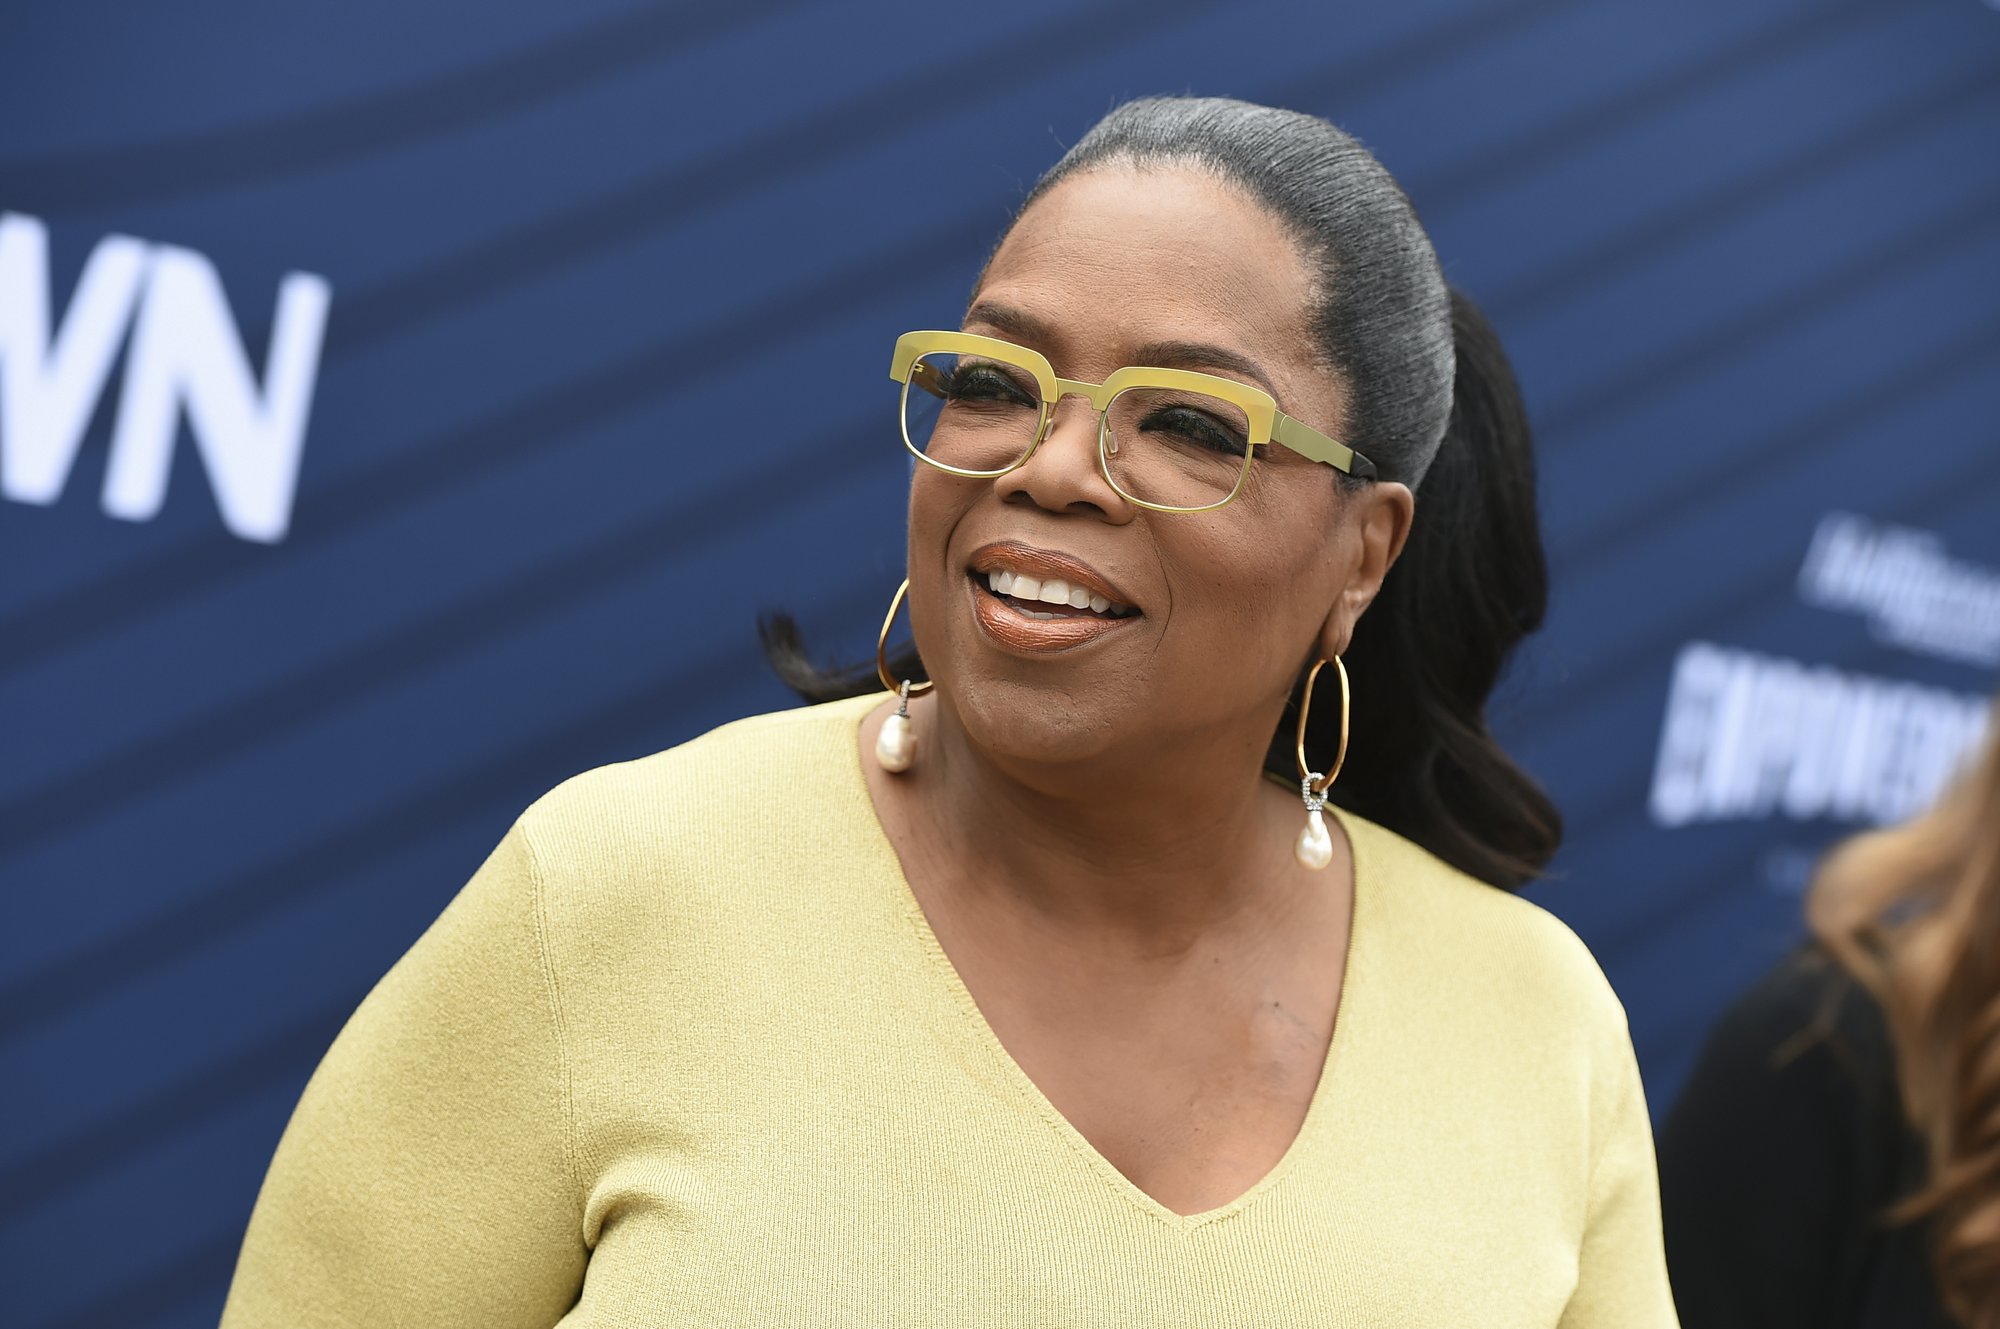 Oprah Winfrey gets emotional at Hollywood empowerment event